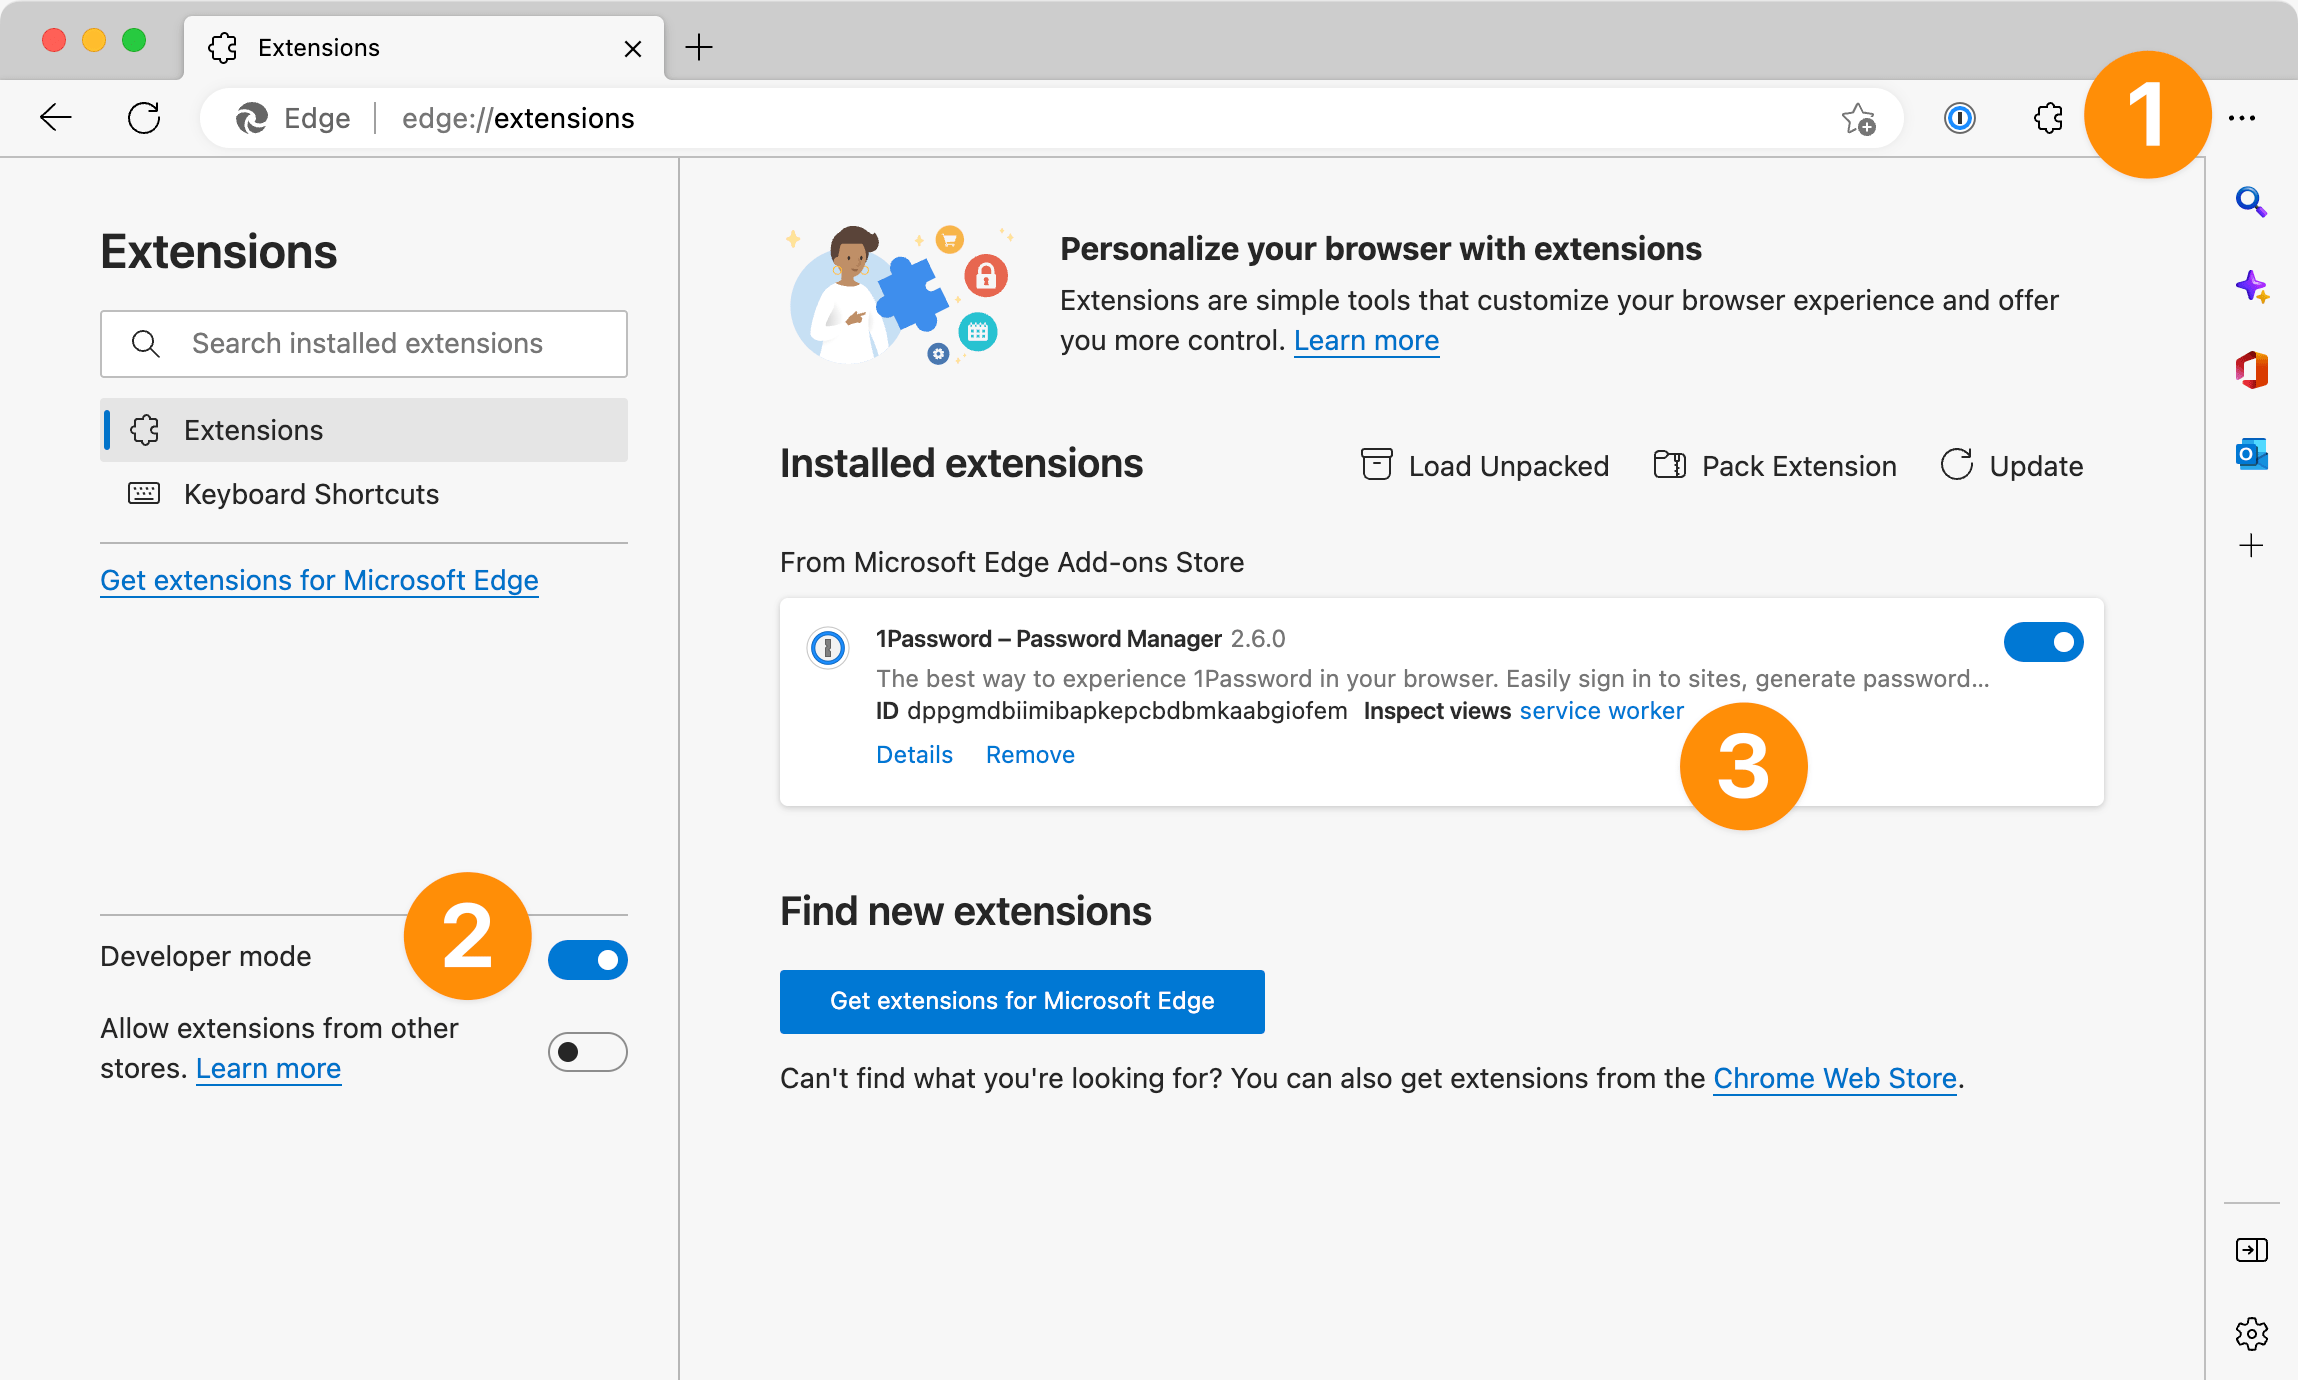 The Microsoft Edge Extensions page with the numbers 1 to 3, indicating the location of each step